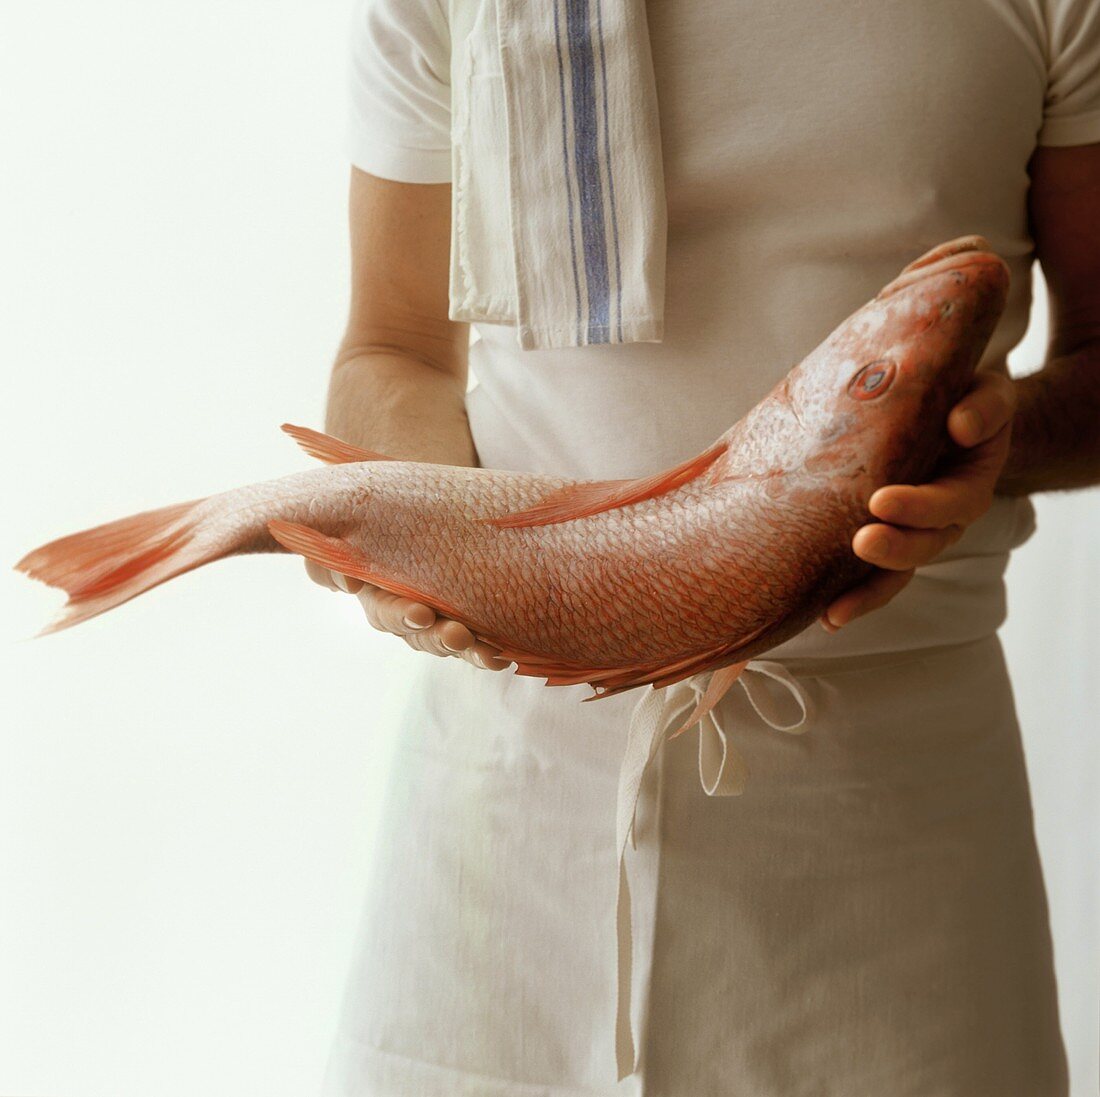 Chef holding large fish (snapper) in his hands